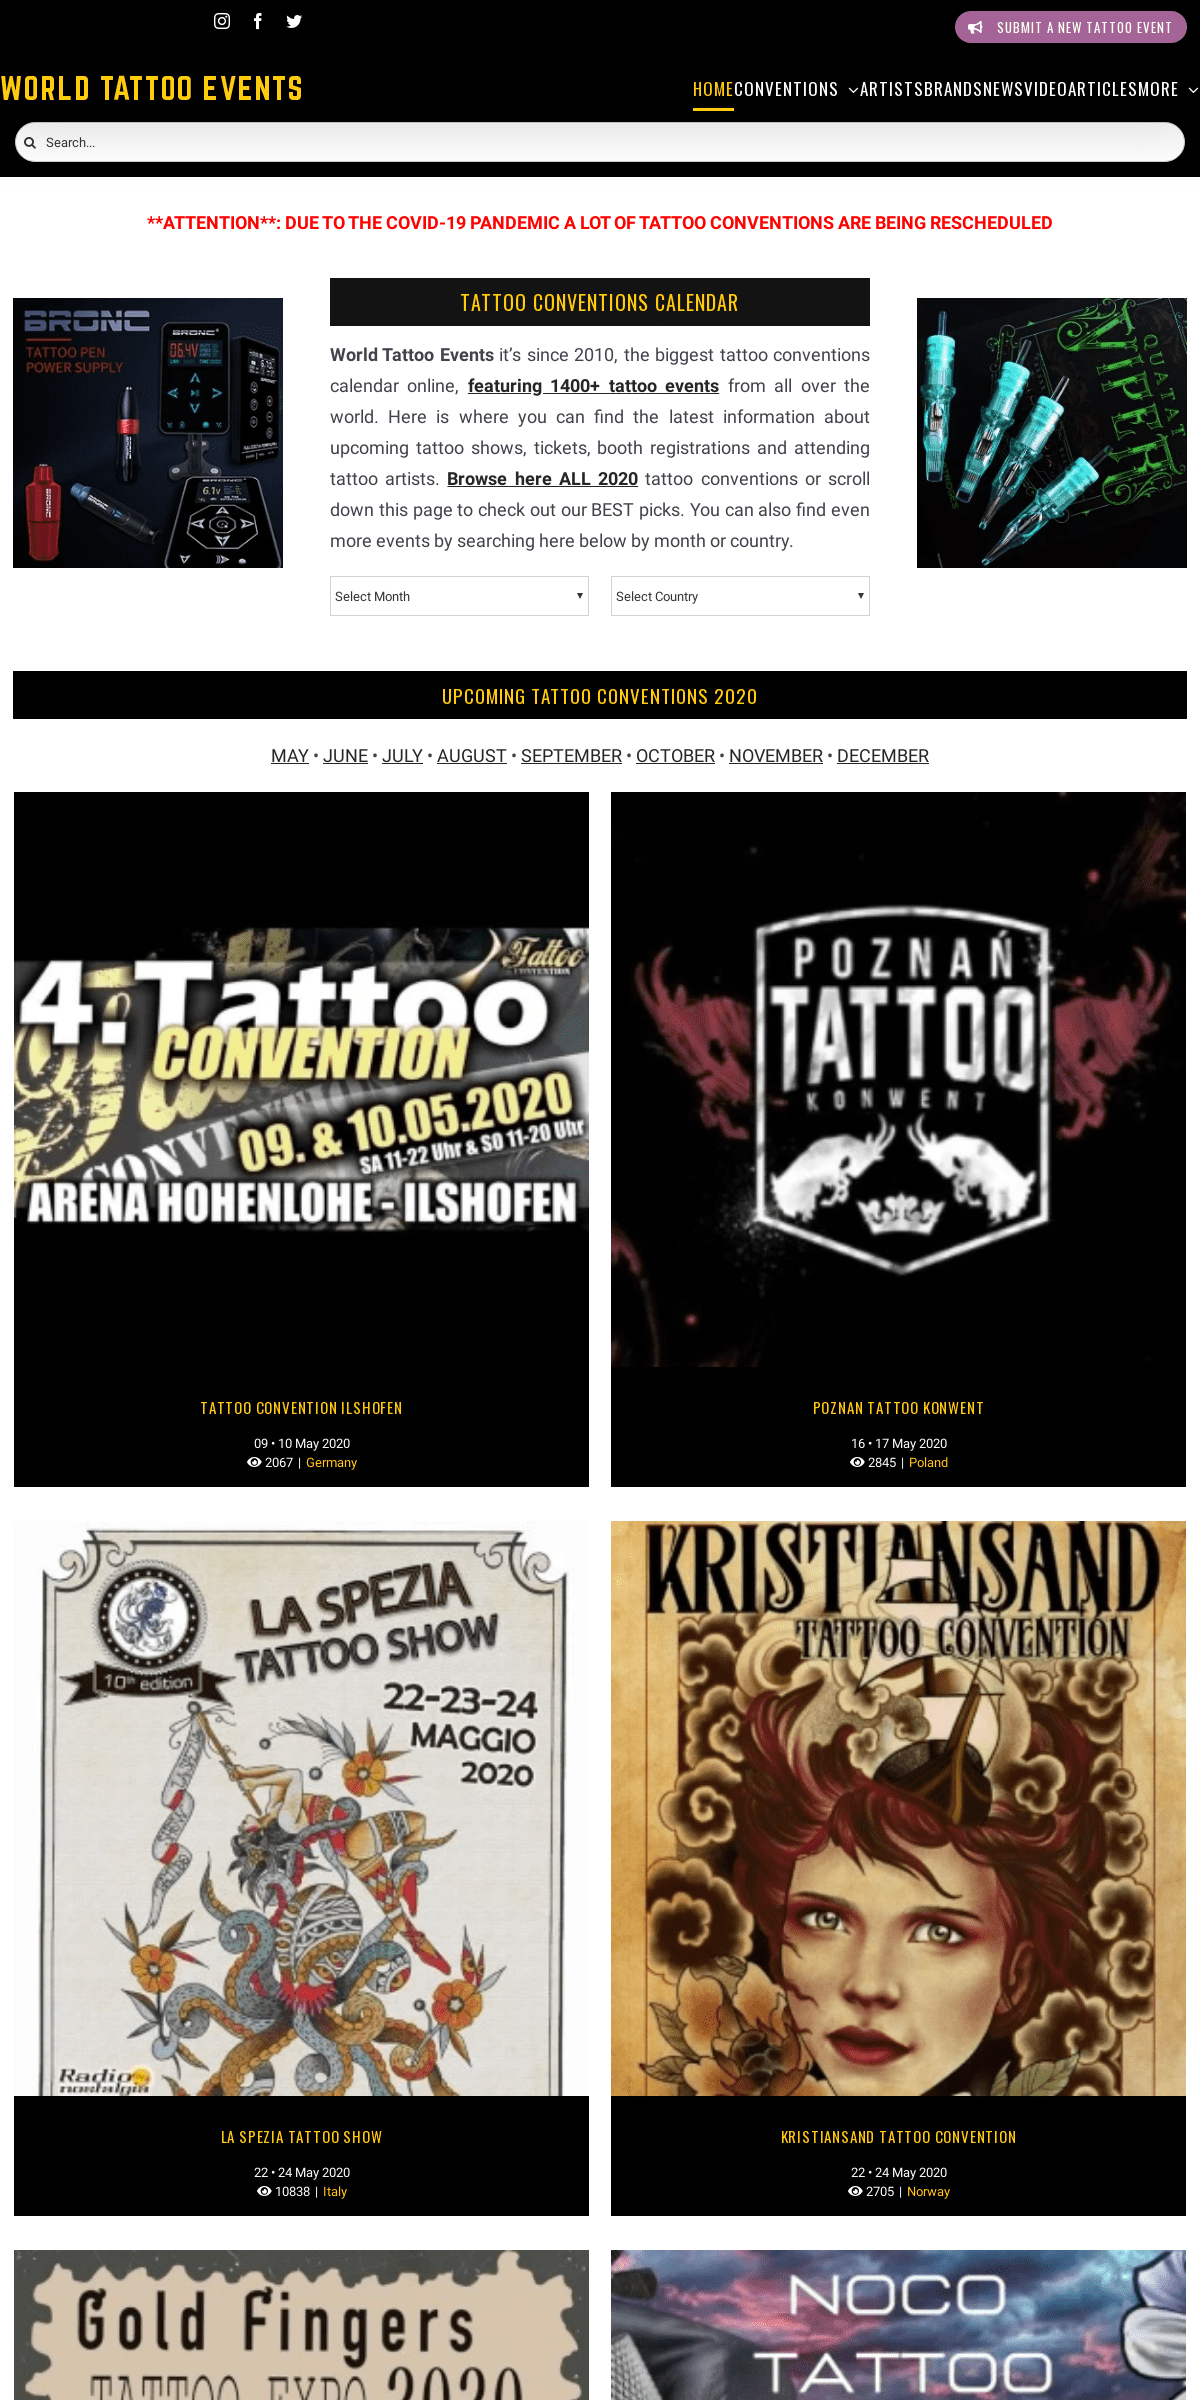 A complete backup of worldtattooevents.com